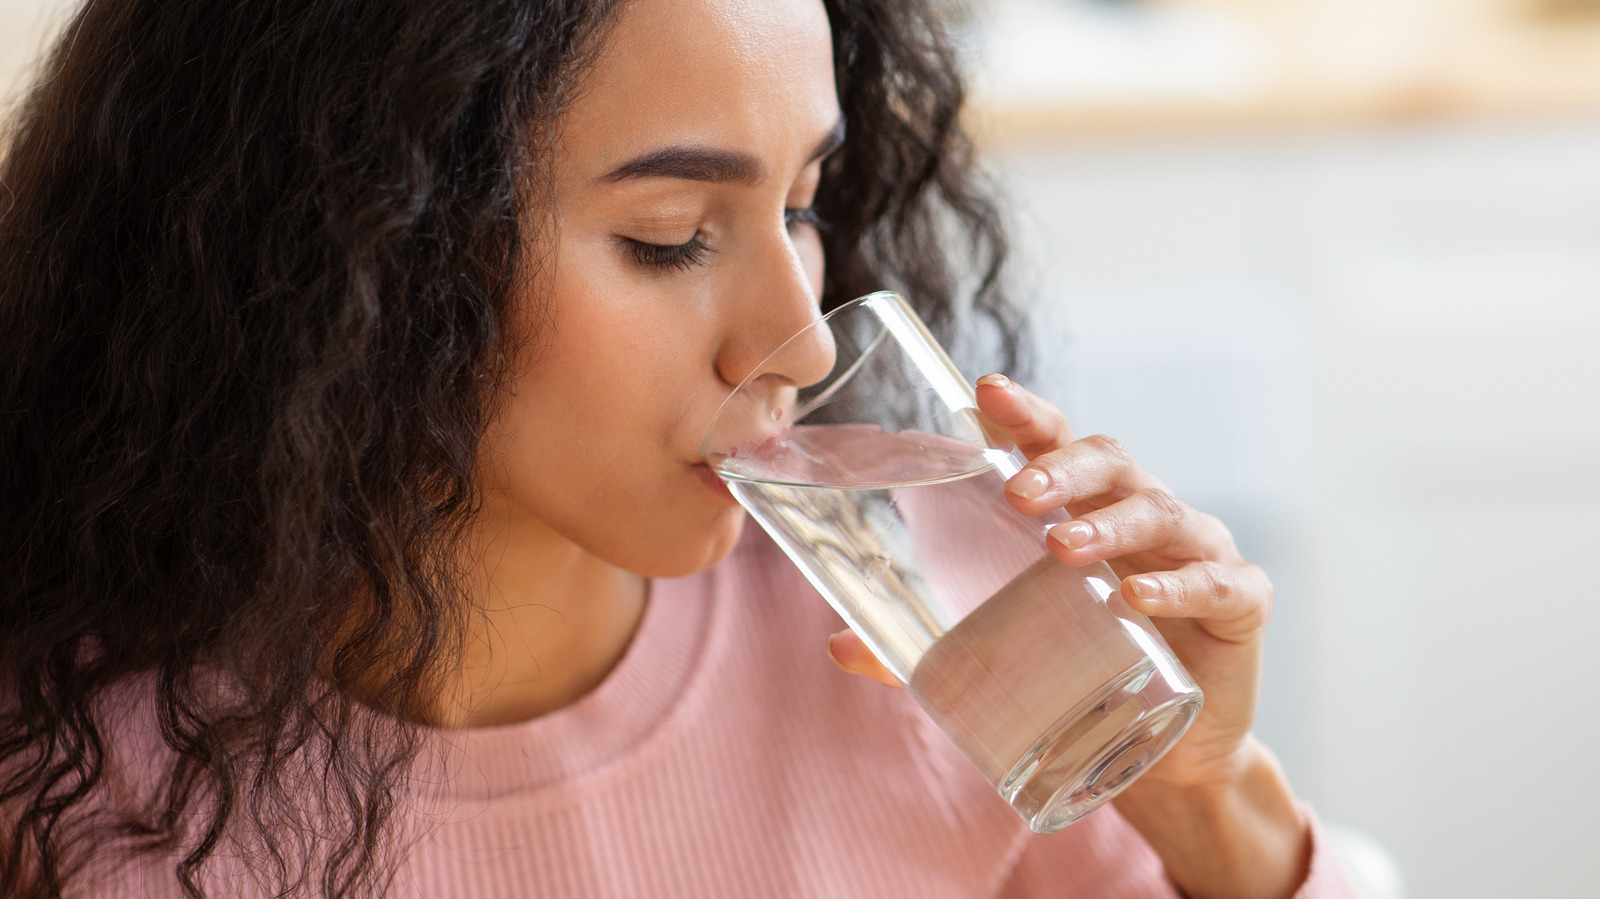 What Really Happens To Your Body If You Don't Drink Enough Water